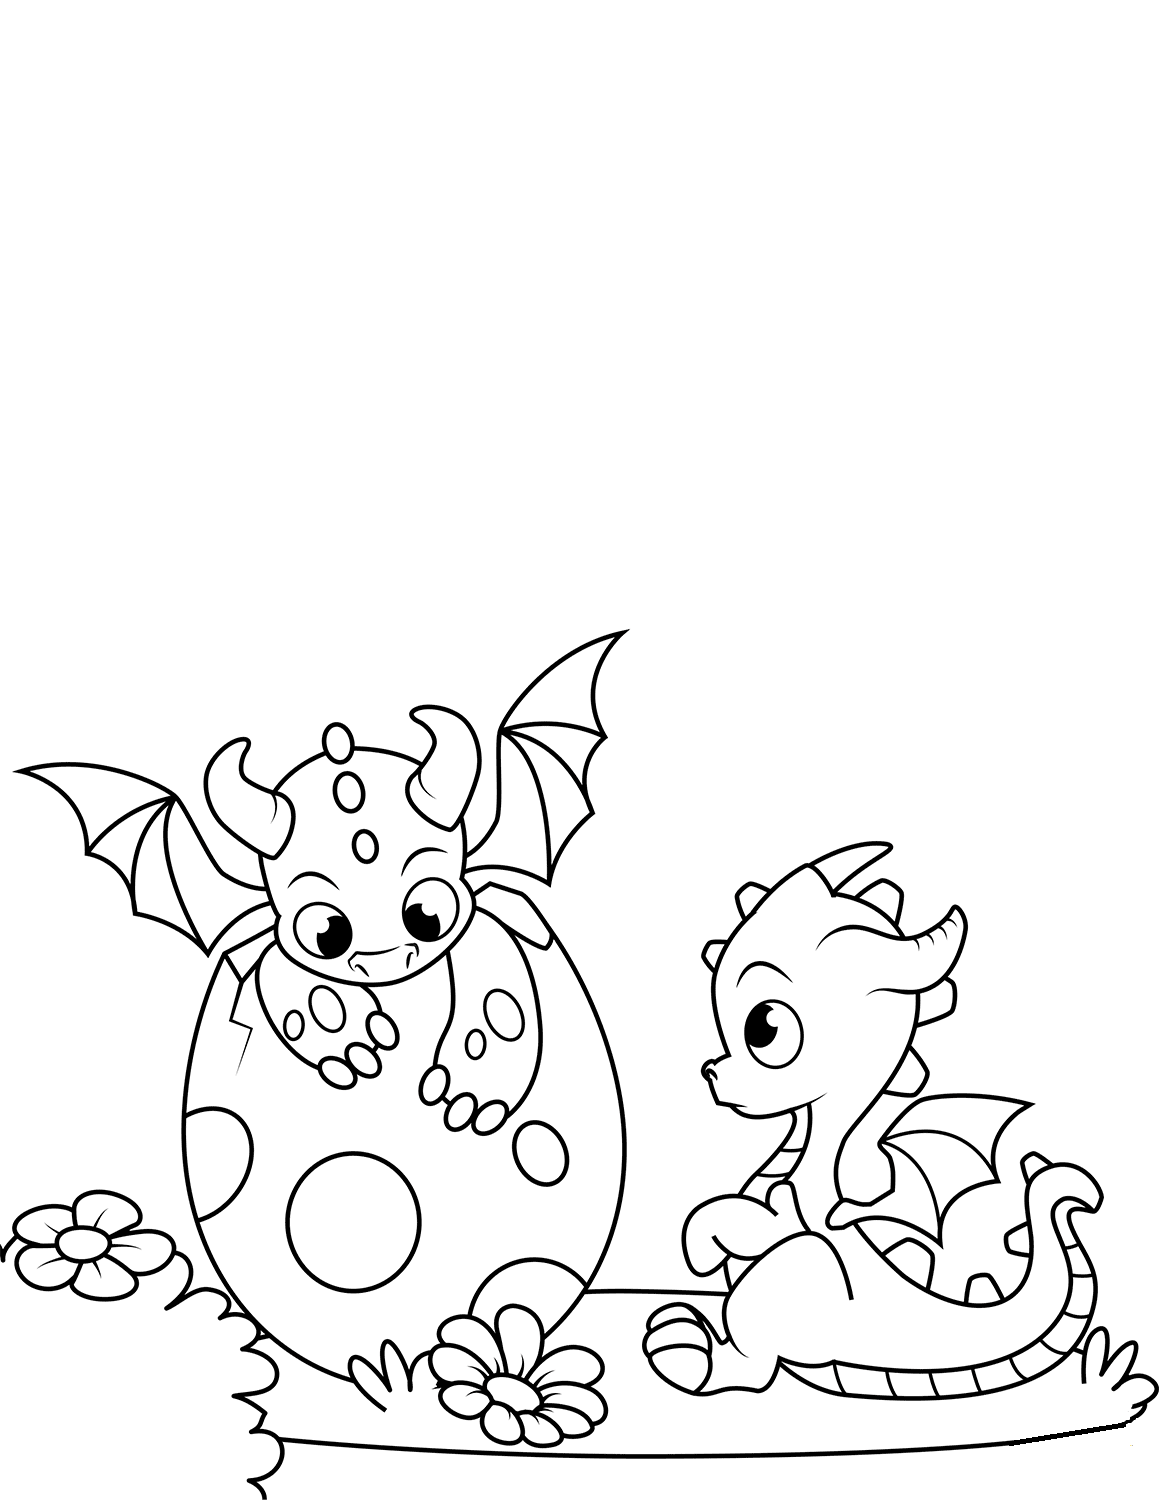 Get Coloring Pages Of Baby Dragons Images